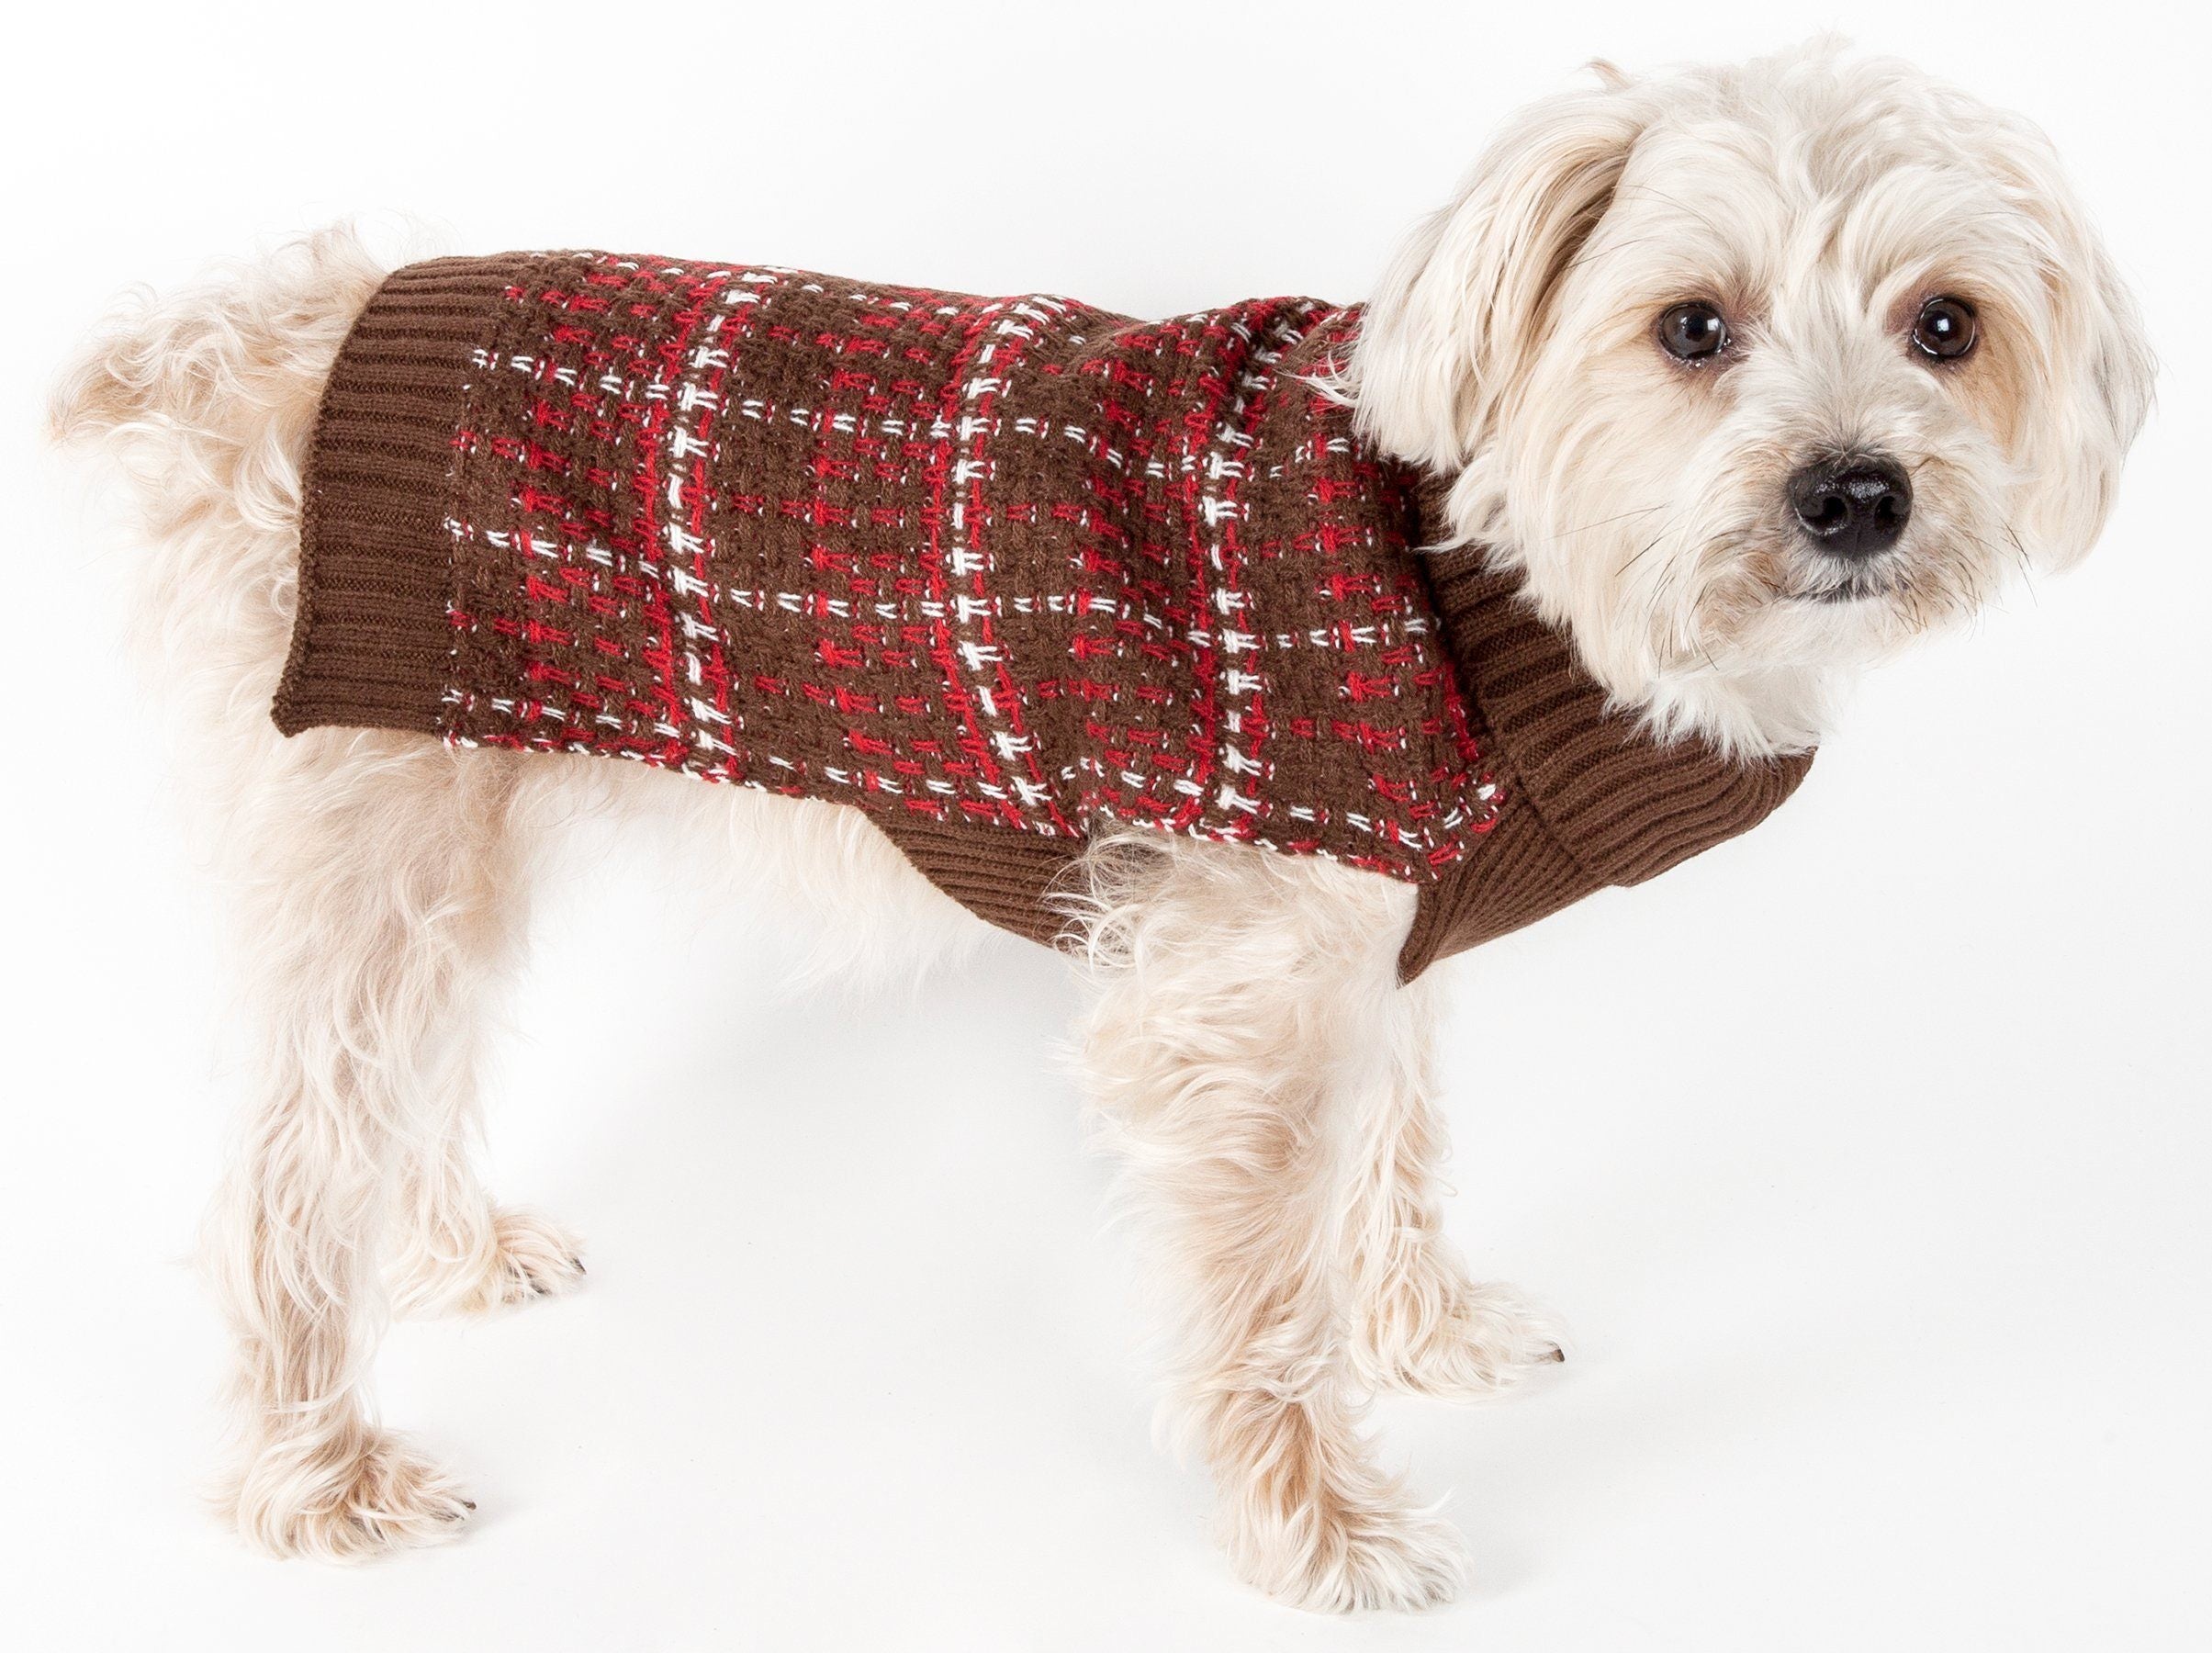 Pet Life ® Vintage Symphony Static Fashion Knitted Designer Dog Sweater X-Small Mud Brown, Red And White